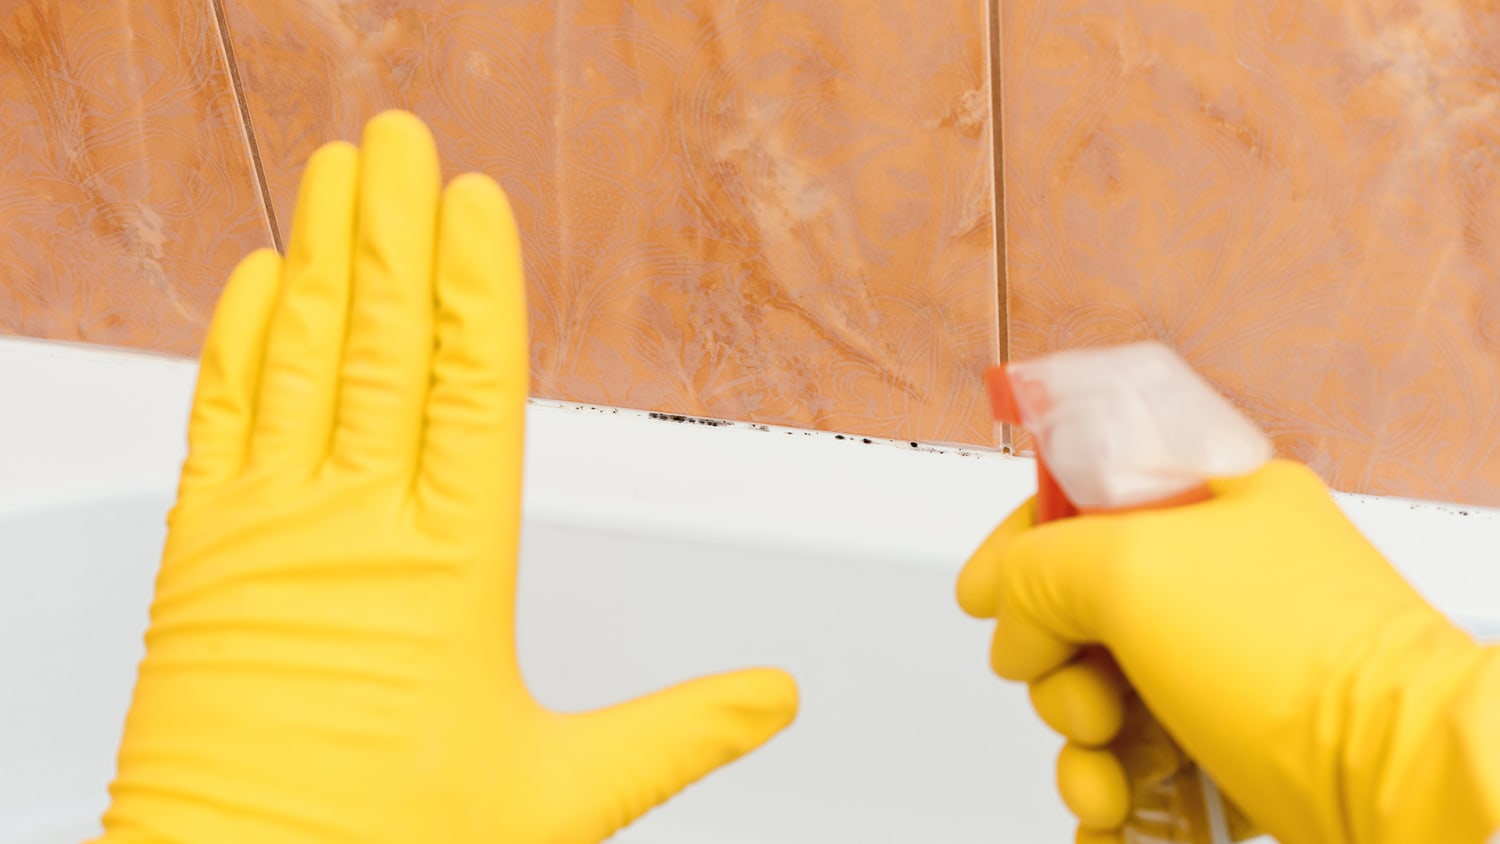 How to remove mold and mildew from